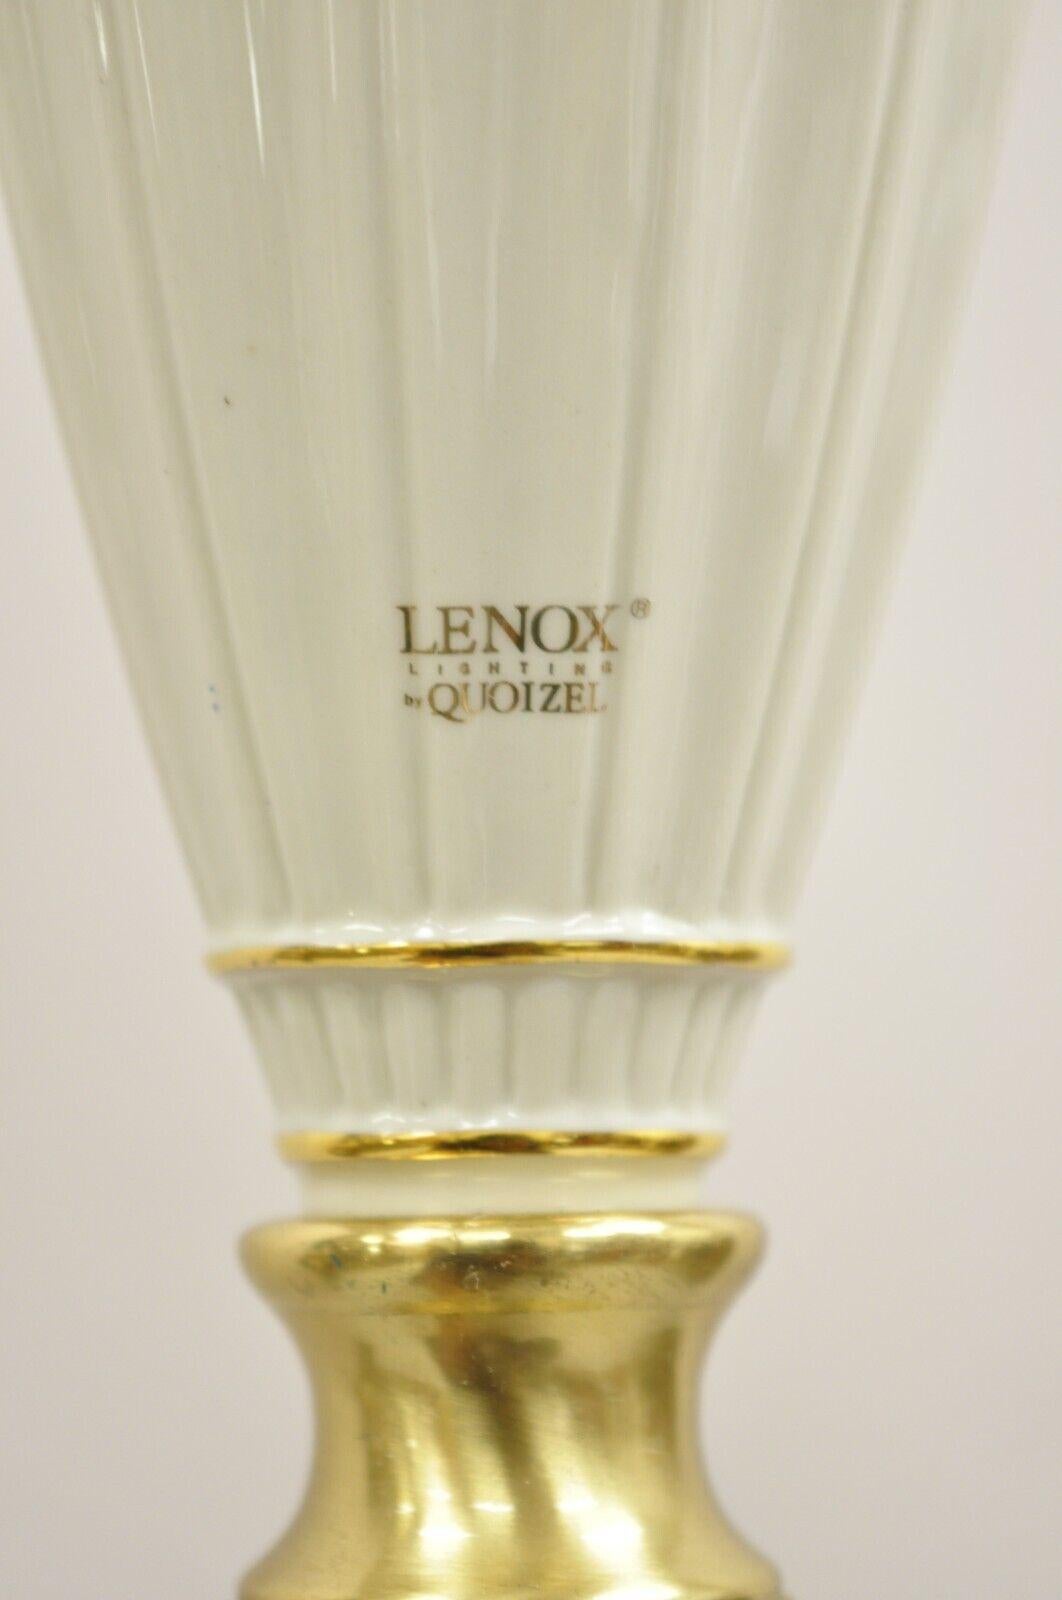 Lenox Quoizel White Porcelain Brass Candlestick Pole Floor Lamp with Shade In Good Condition In Philadelphia, PA